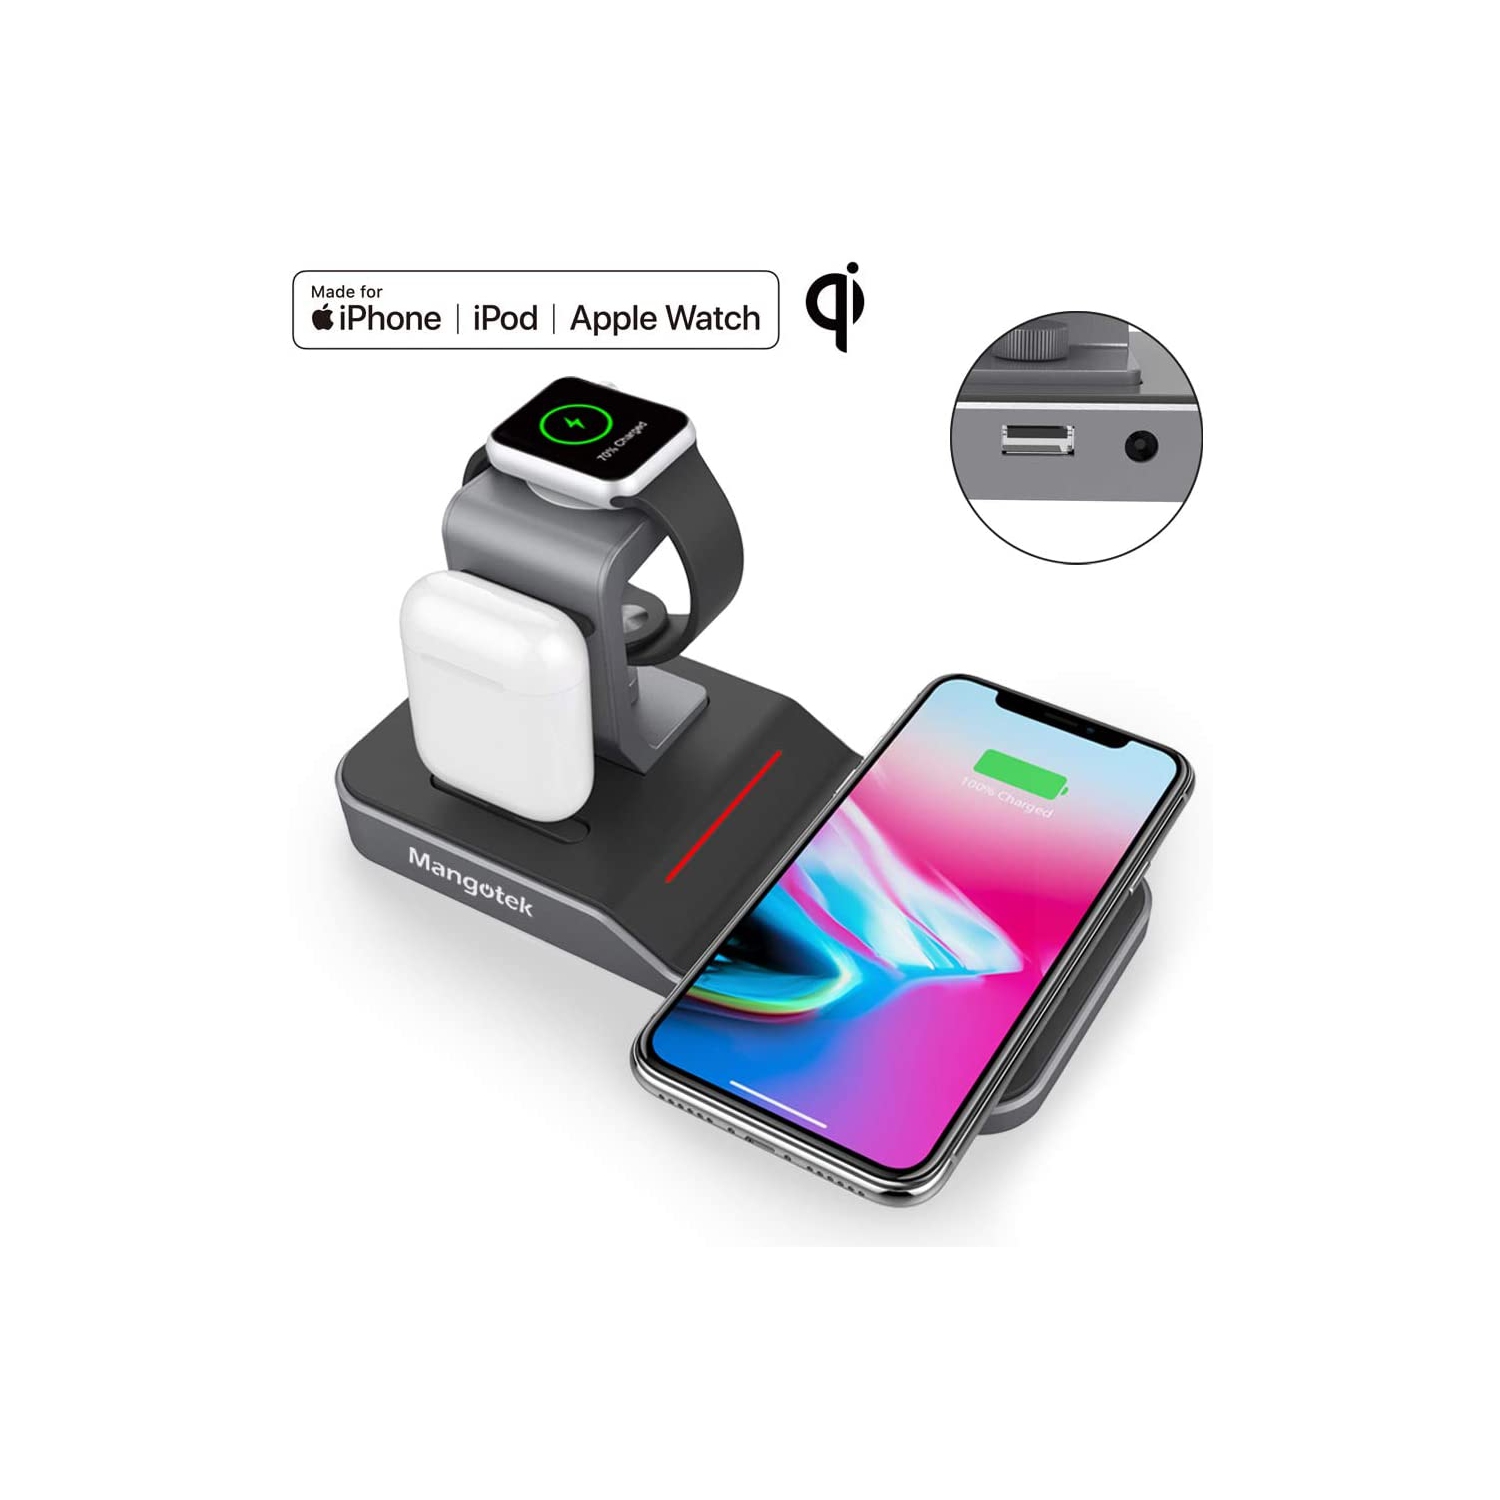 Apple Watch Stand Wireless Charger for iPhone and iWatch, 4 in 1 Phone Charging Station with Lightning